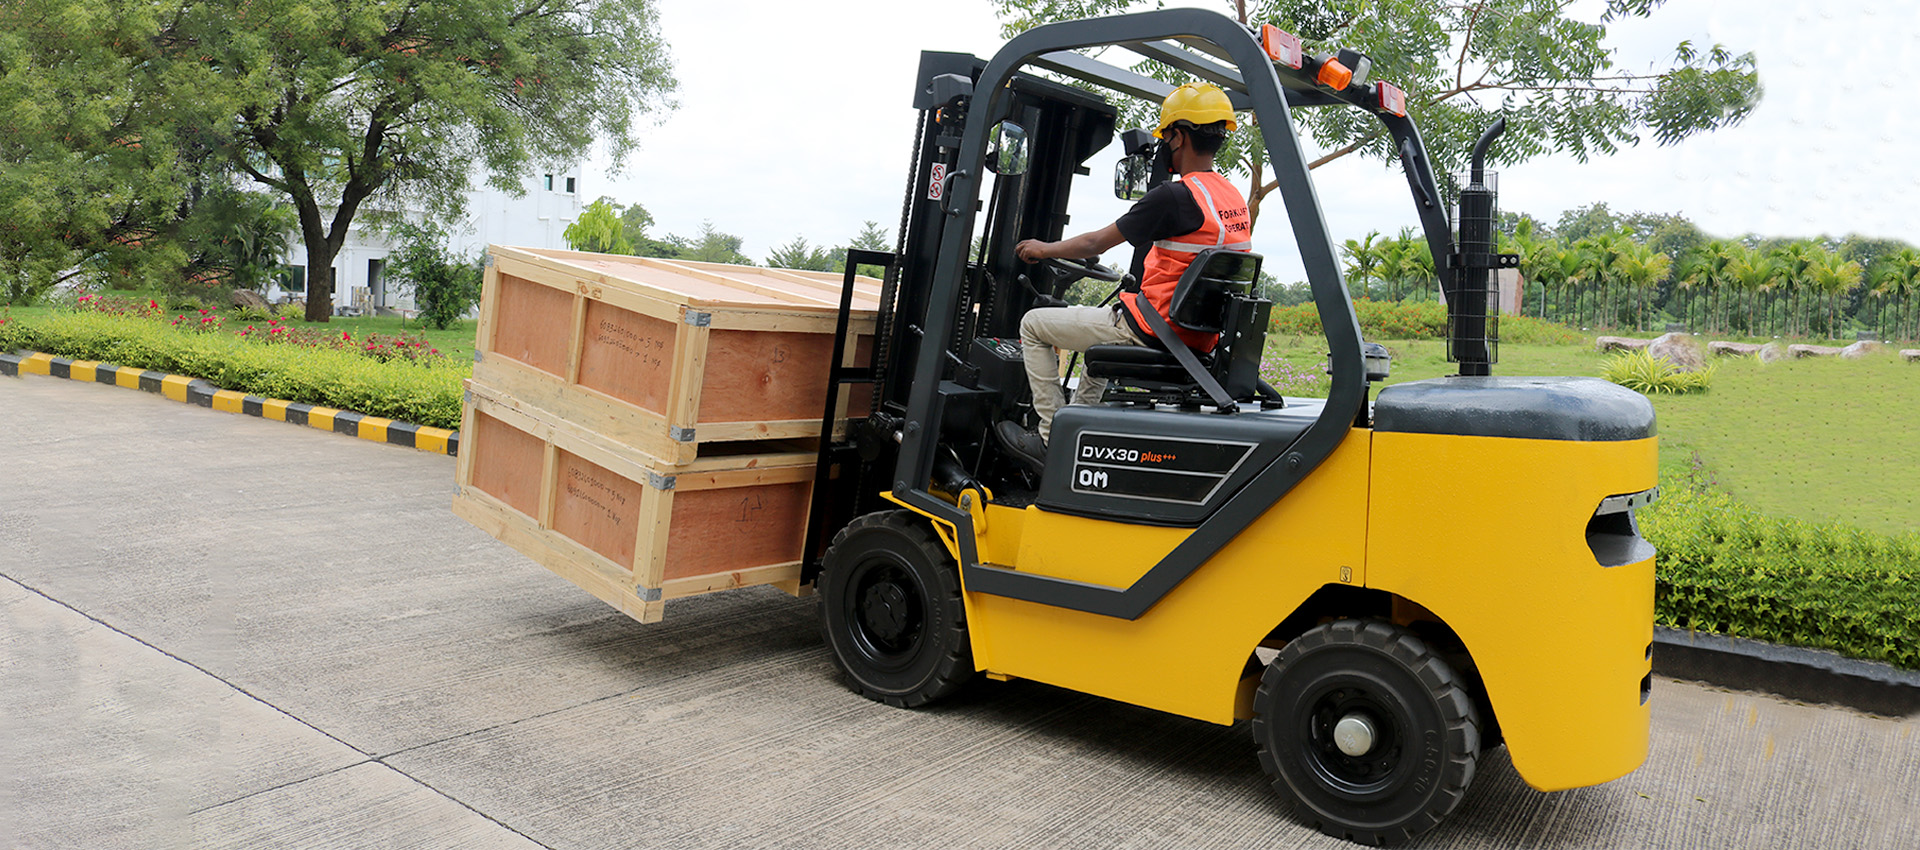 The Modern Forklift – the bedrock of the warehousing district